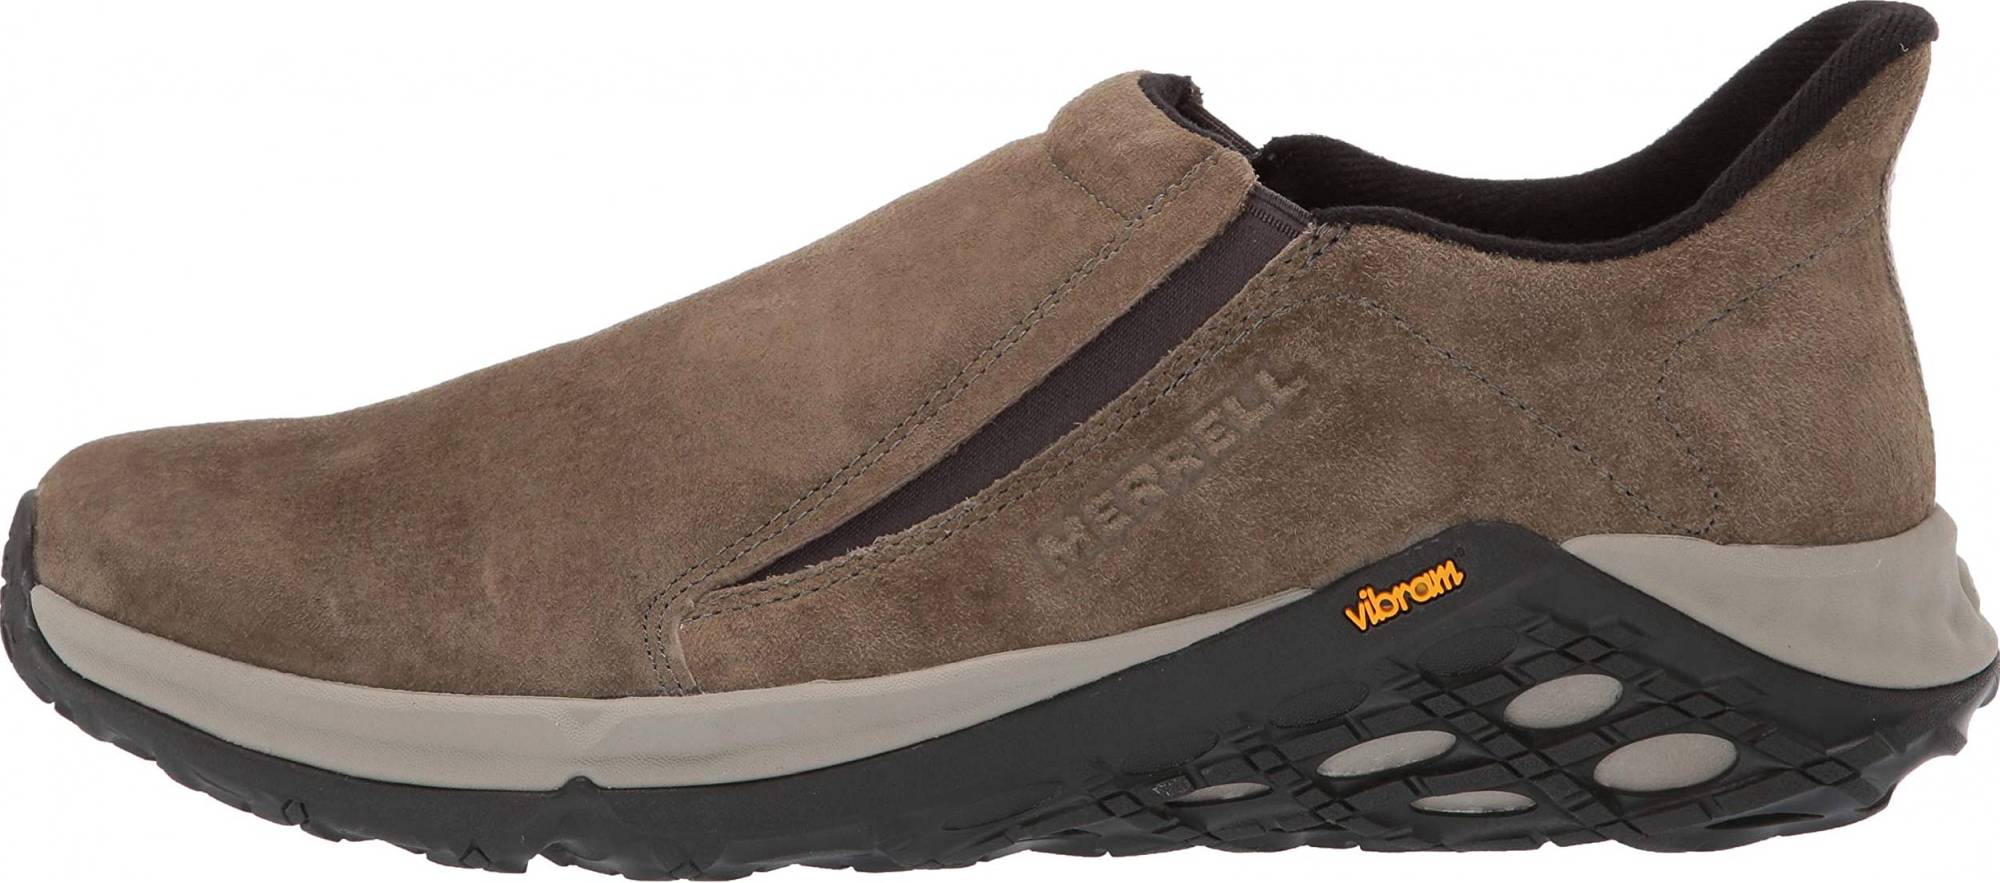 Merrell Jungle Moc 2.0 – Shoes Reviews & Reasons To Buy